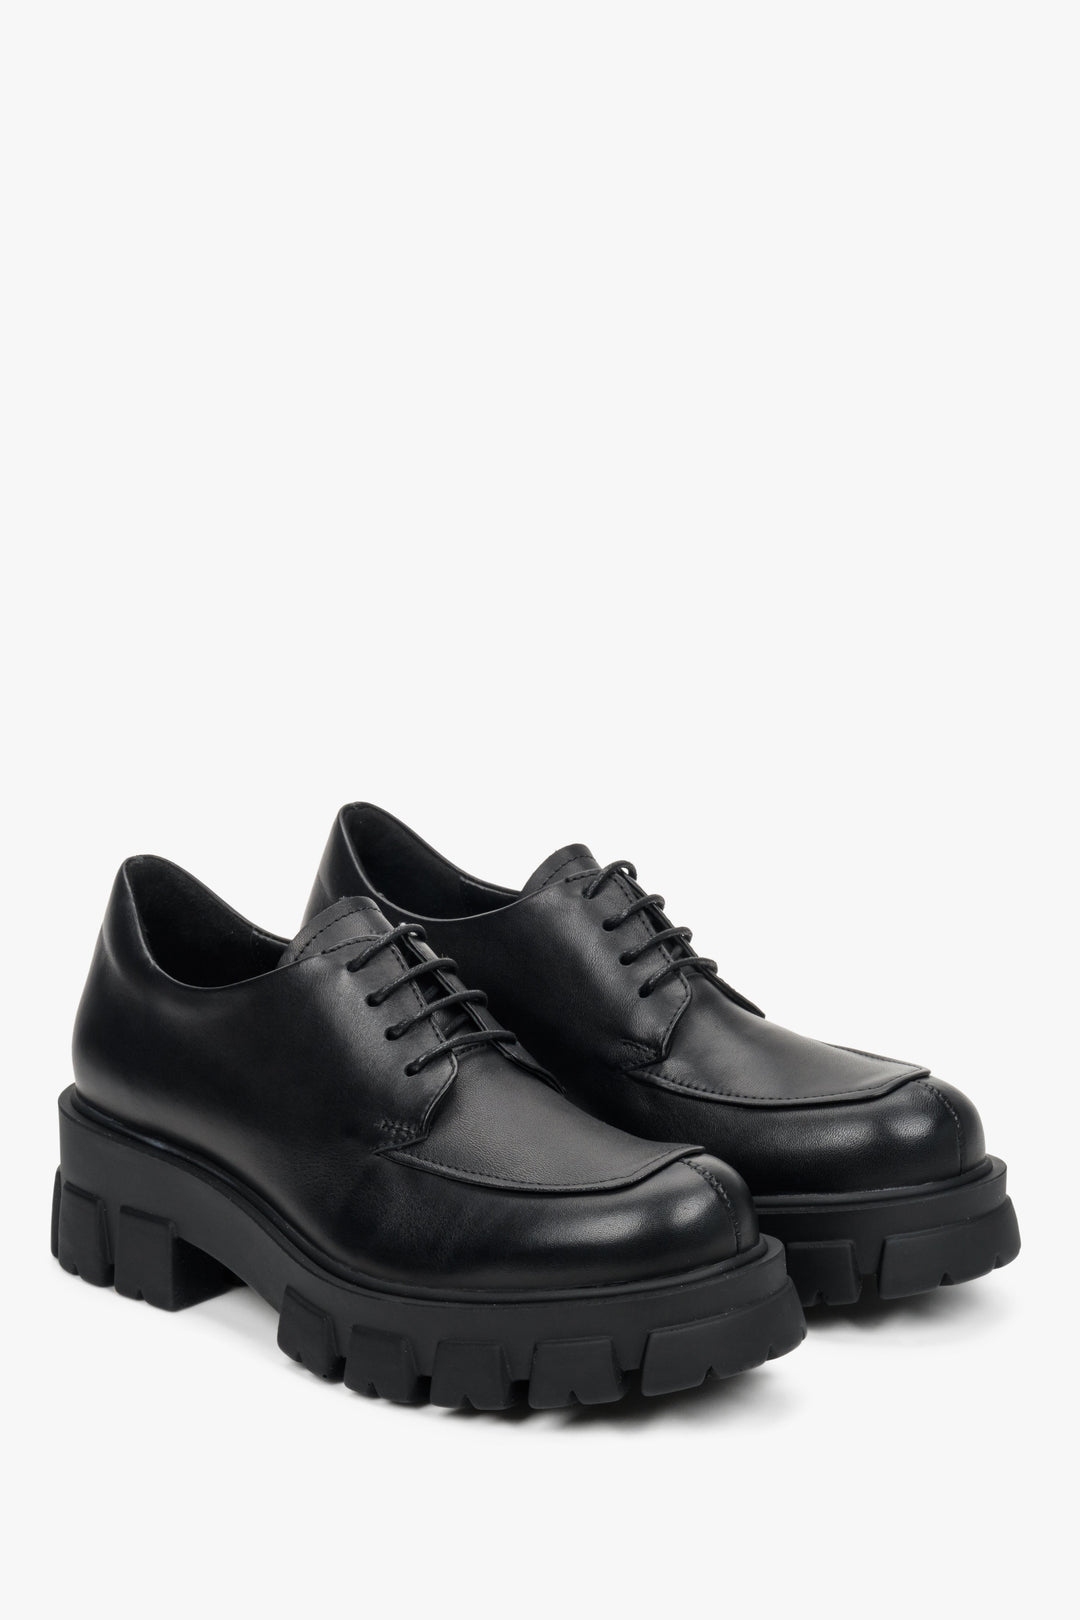 Women's black leather shoes by Estro - presentation of the side lines.